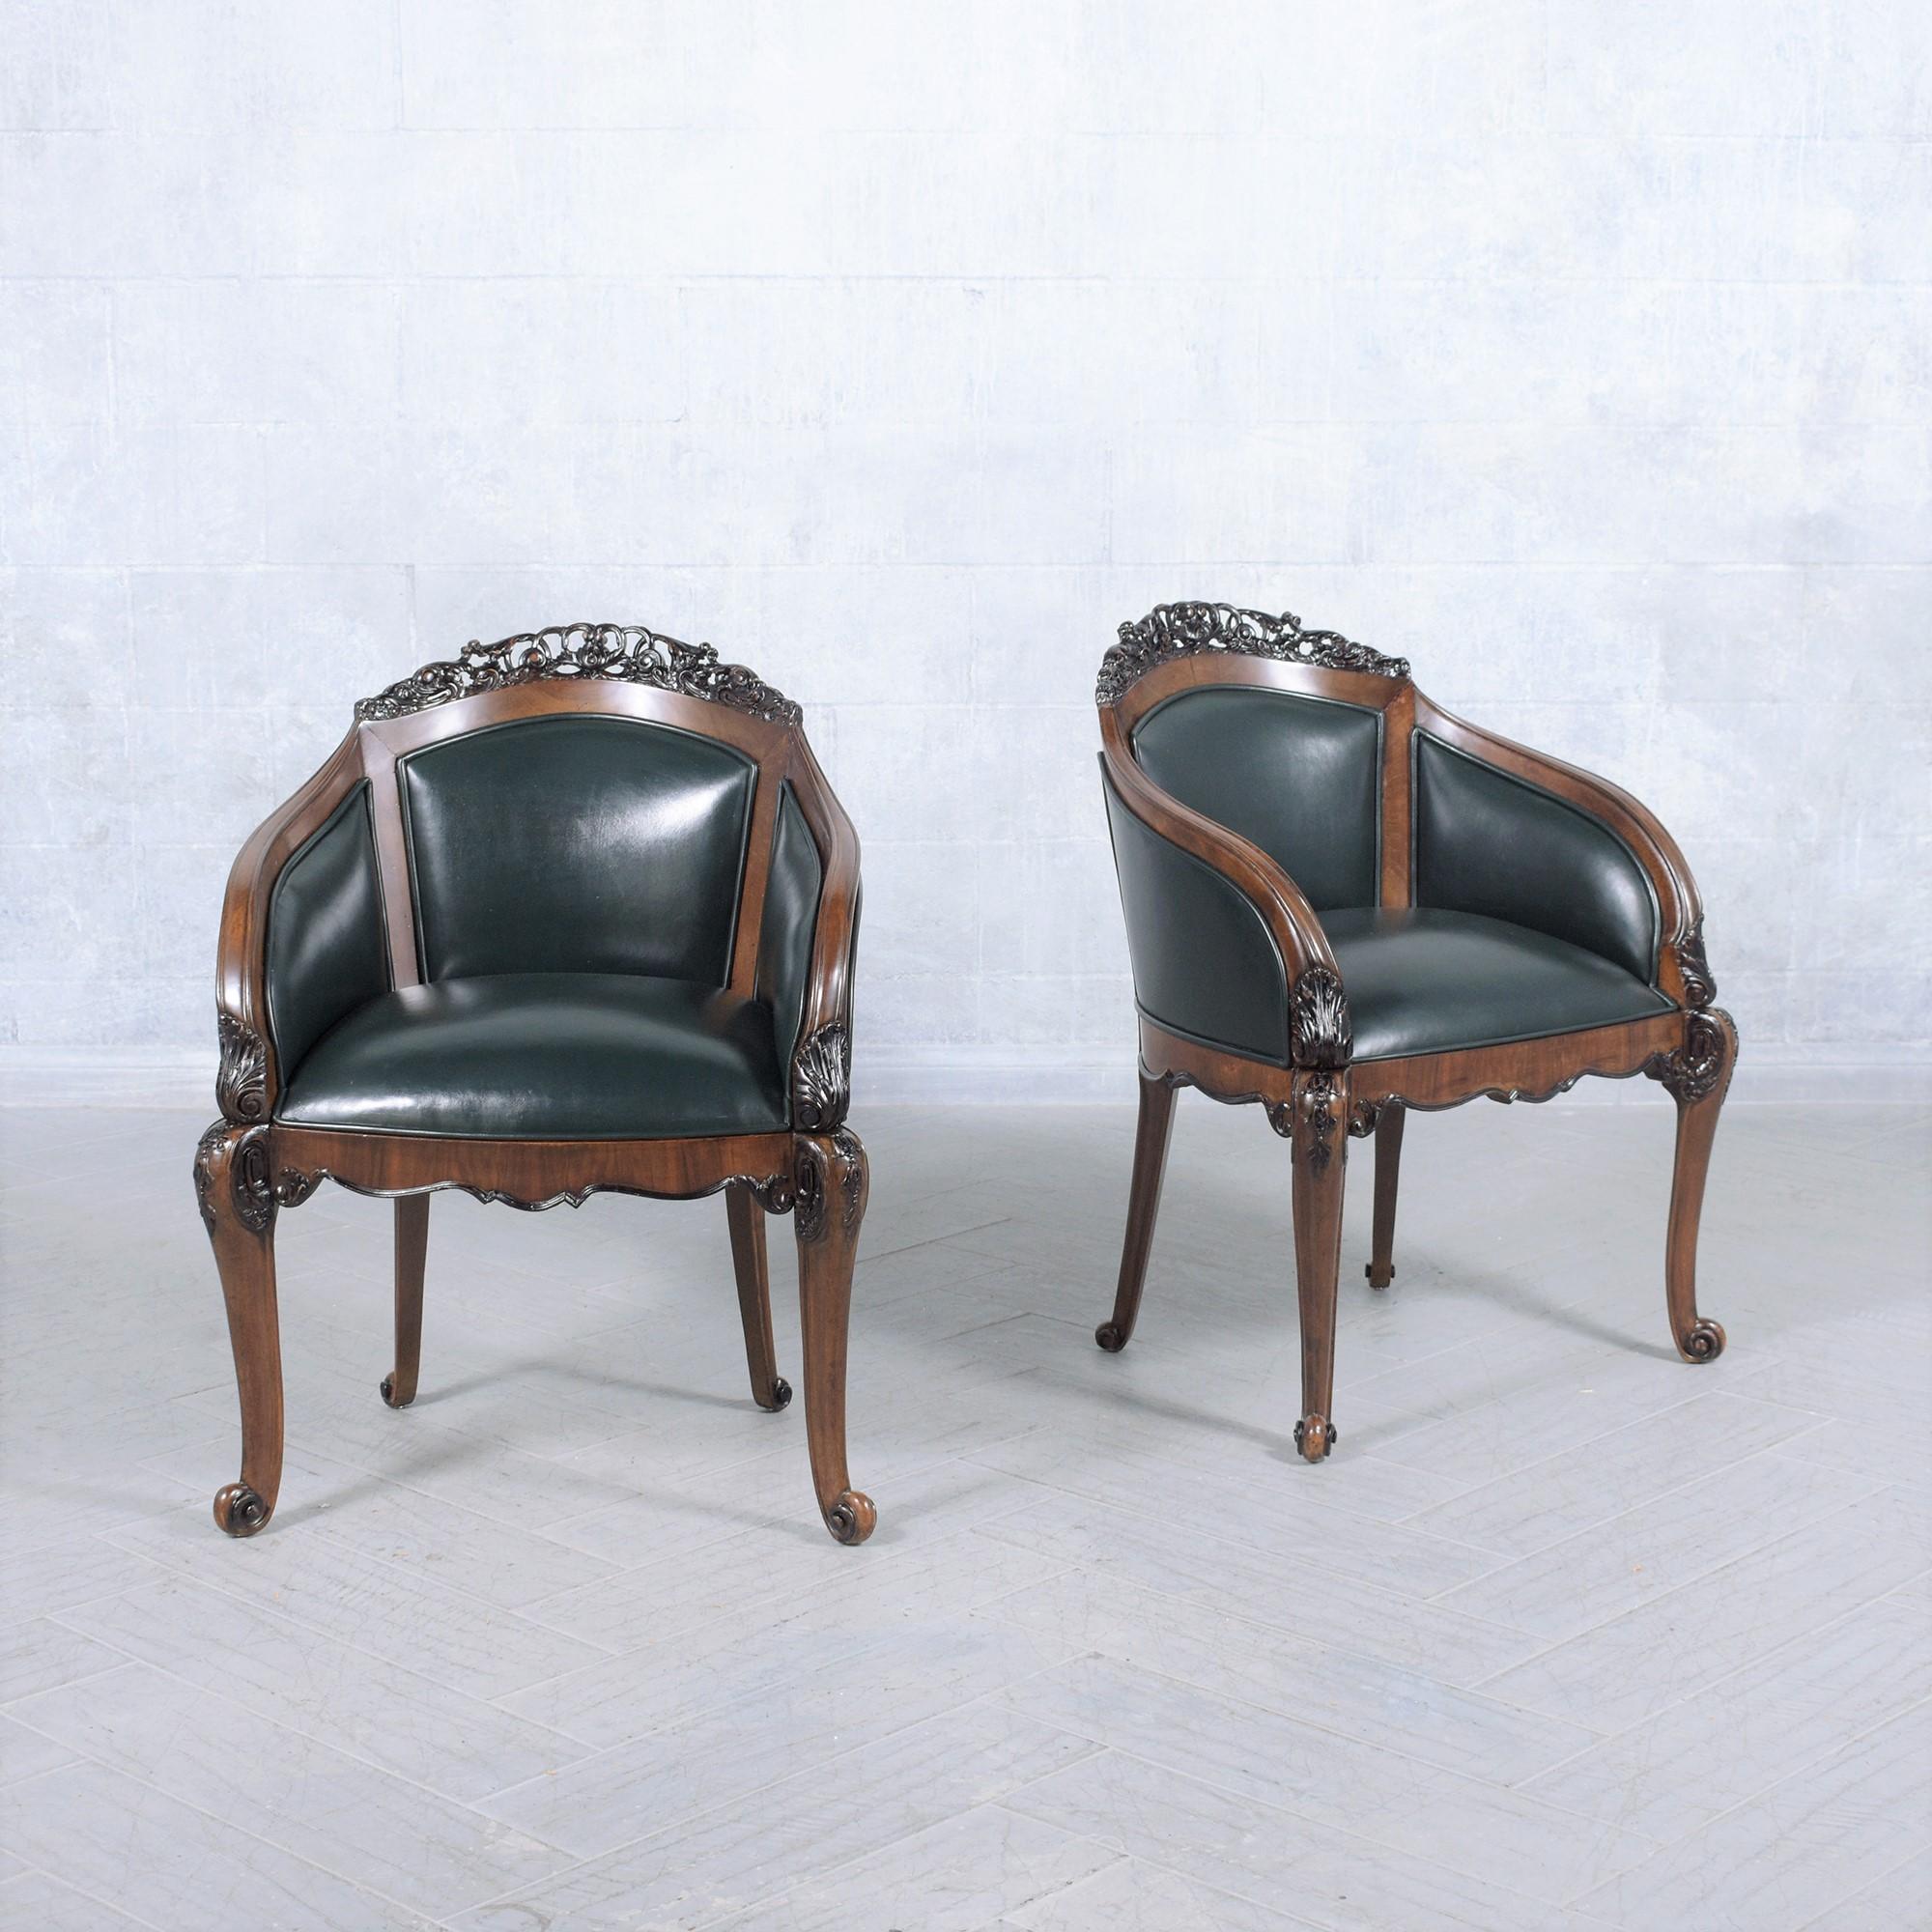 Step into the past with our exquisitely restored late 19th-century English Chinoiserie Bergères, a testament to the fusion of Eastern artistry and classic English craftsmanship. These chairs have been revived with unparalleled care, now upholstered